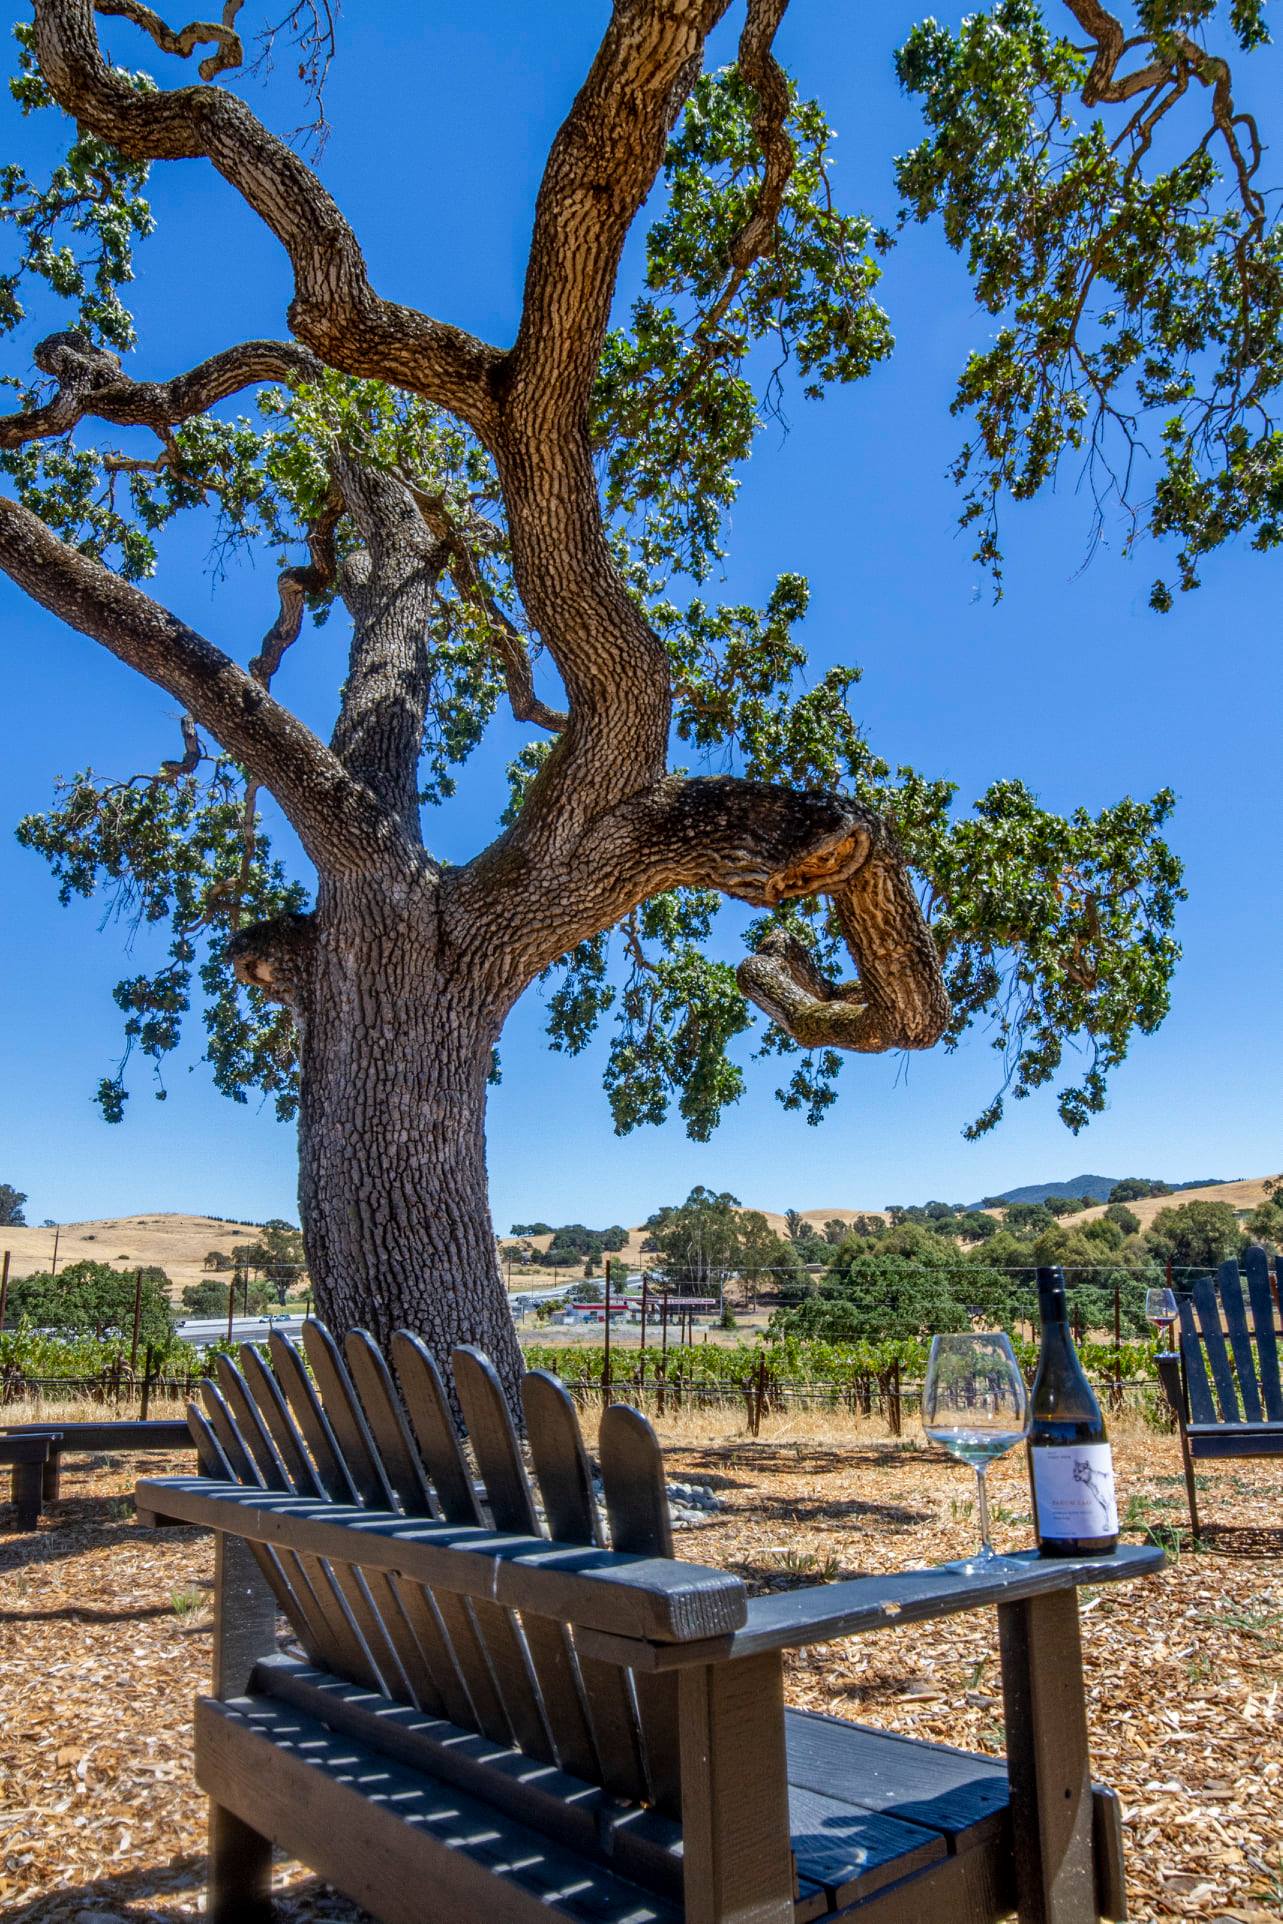 Large Adirondack chair with a bottle of wine resting on the arm rest, pictured in front of an old oak tree